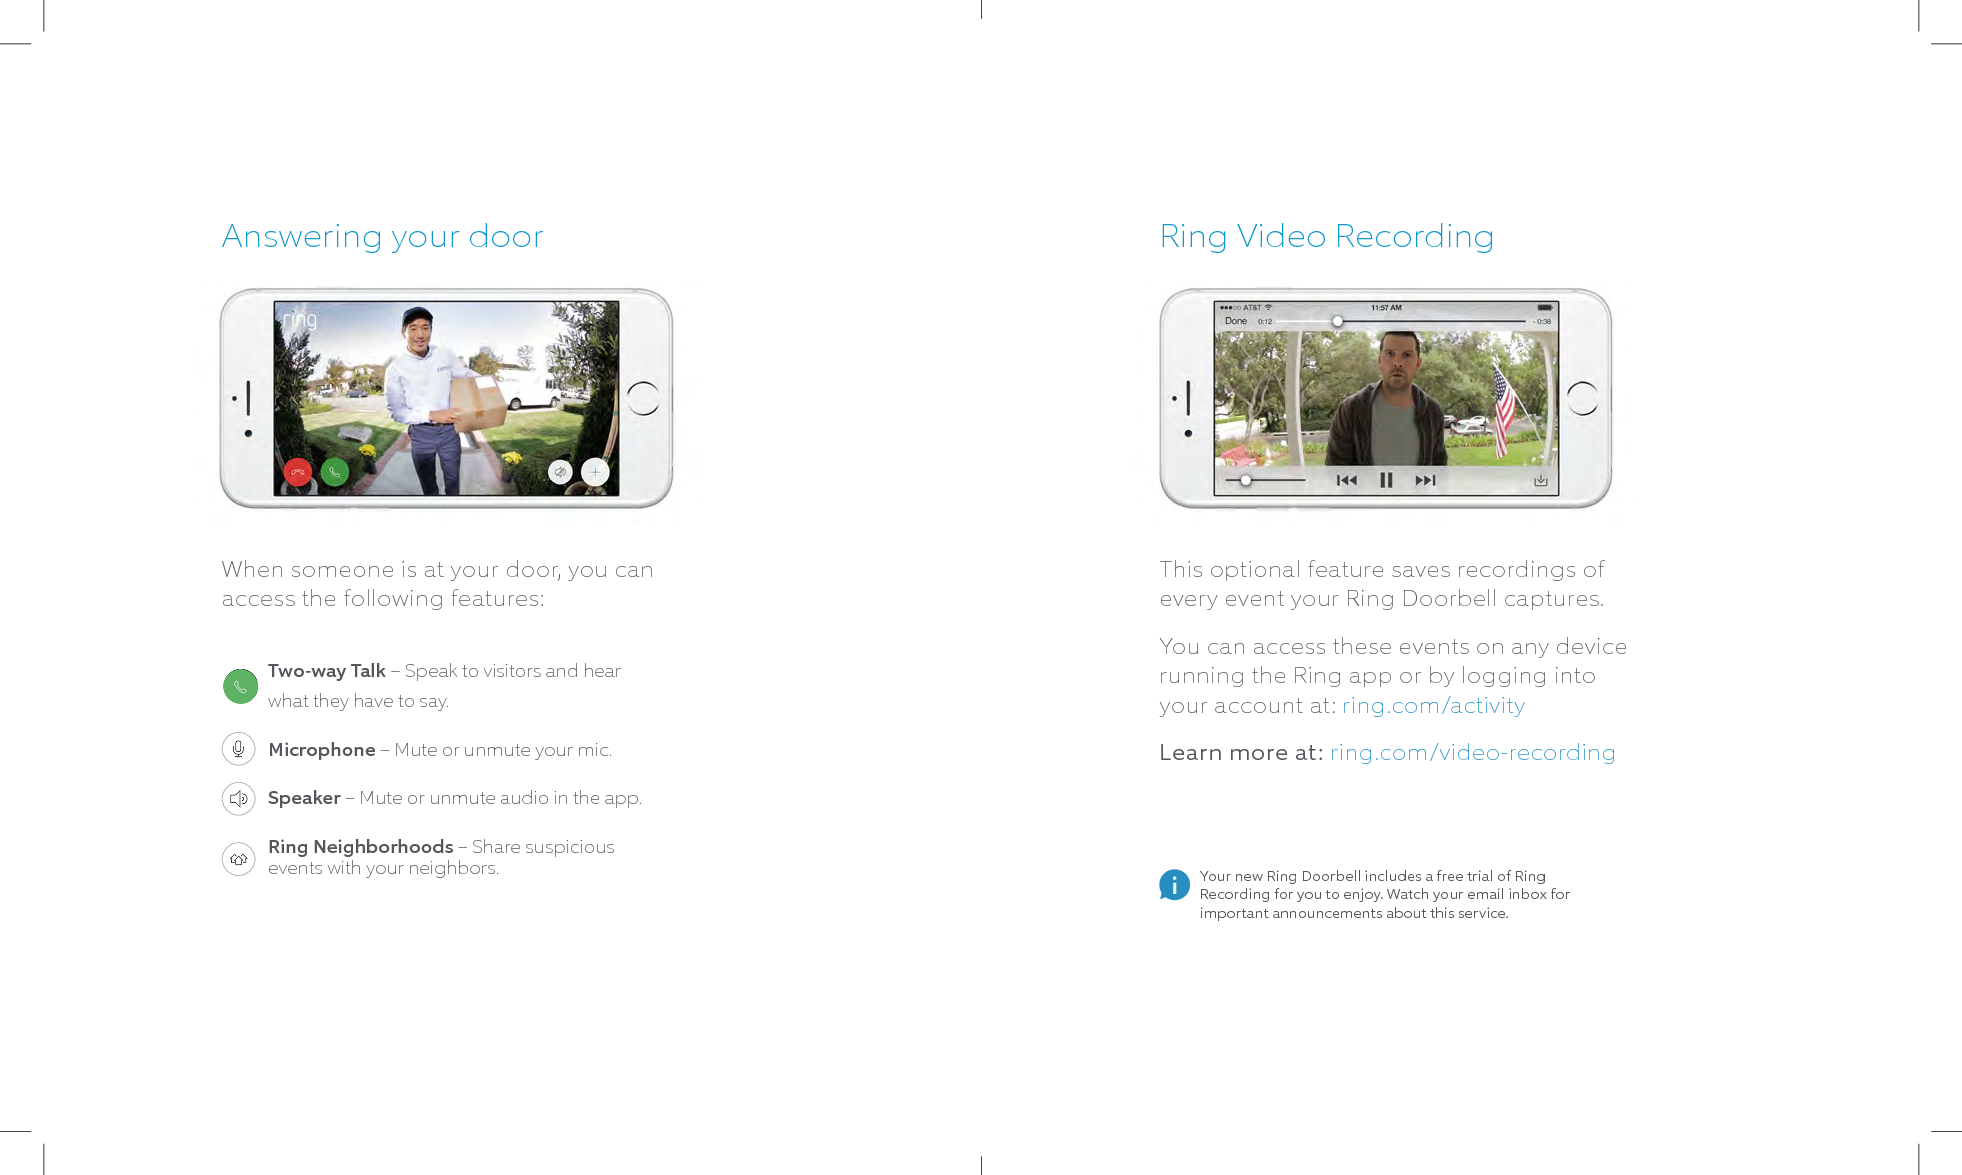 Ring Video RecordingThis optional feature saves recordings of every event your Ring Doorbell captures. You can access these events on any device running the Ring app or by logging into your account at: ring.com/activityLearn more at: ring.com/video-recordingAnswering your doorWhen someone is at your door, you can access the following features:Your new Ring Doorbell includes a free trial of Ring Recording for you to enjoy. Watch your email inbox for important announcements about this service.Two-way Talk – Speak to visitors and hear what they have to say.Microphone – Mute or unmute your mic.Speaker – Mute or unmute audio in the app.Ring Neighborhoods – Share suspicious events with your neighbors.